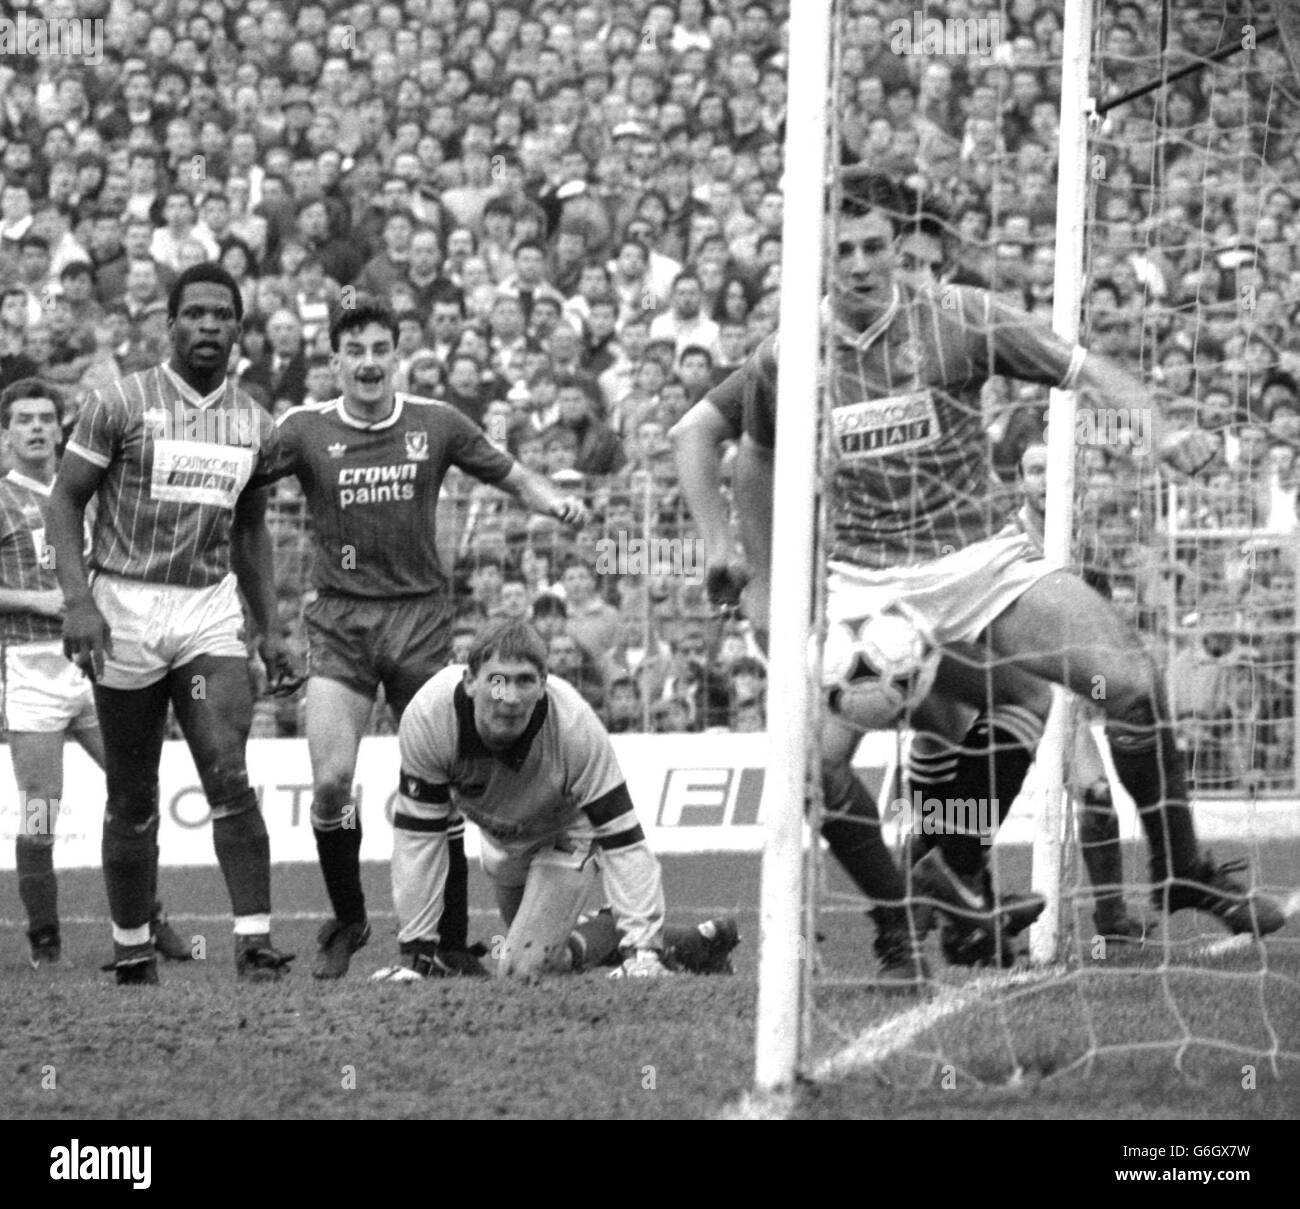 Portsmouth's kneeling goalkeeper Alan Knight and the Portsmouth defence watch in disbelief as John Barnes's cross flies into the goal opening the scoring for Liverpool at Fratton Park. Liverpool's John Aldridge (3rd left) looks on with apparent delight, four minutes into the second half of the Barclays League Division One match. Stock Photo